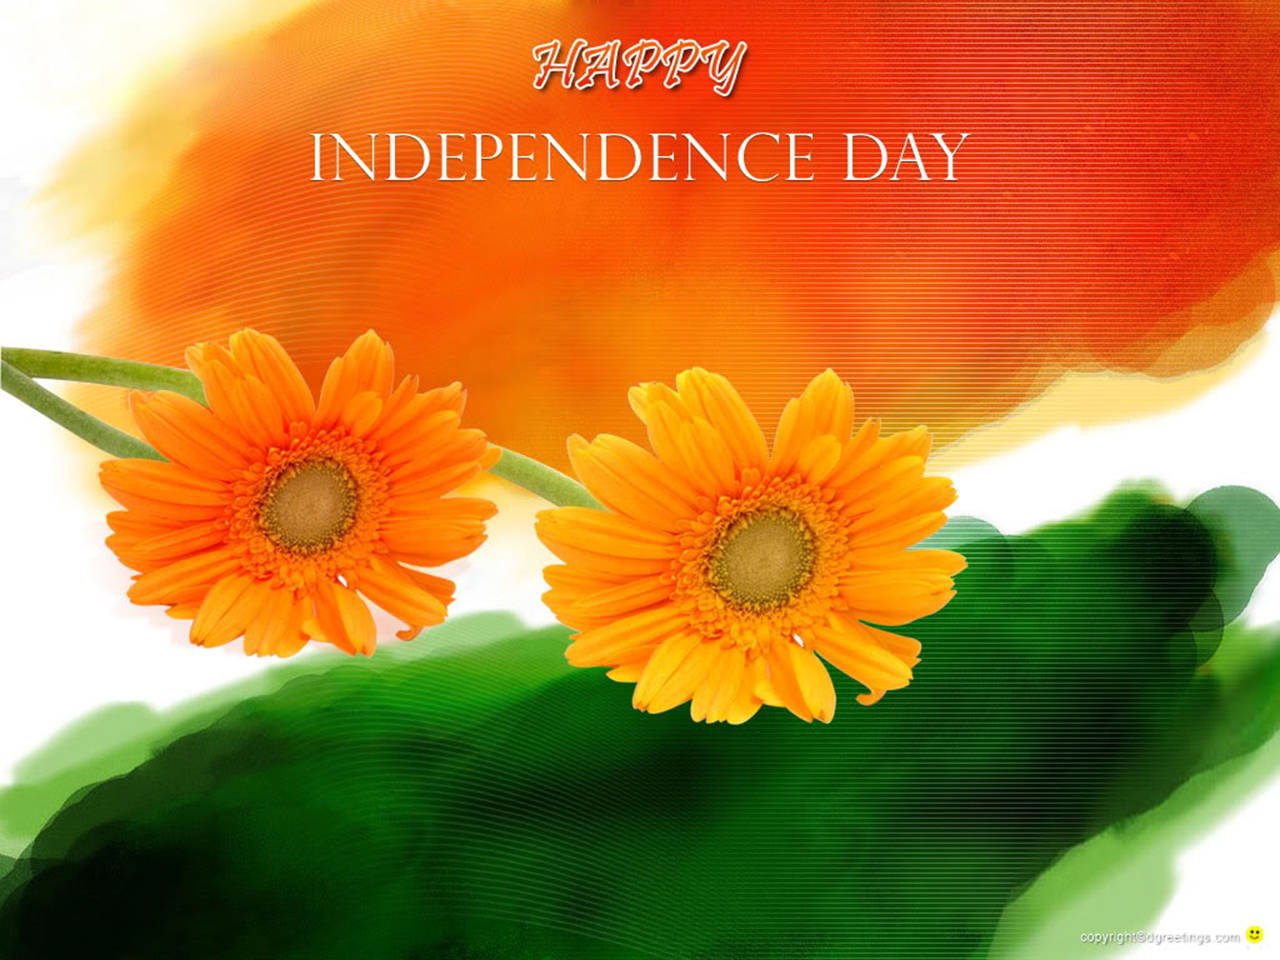 Independence Day Songs In Hindi - HD Wallpaper 